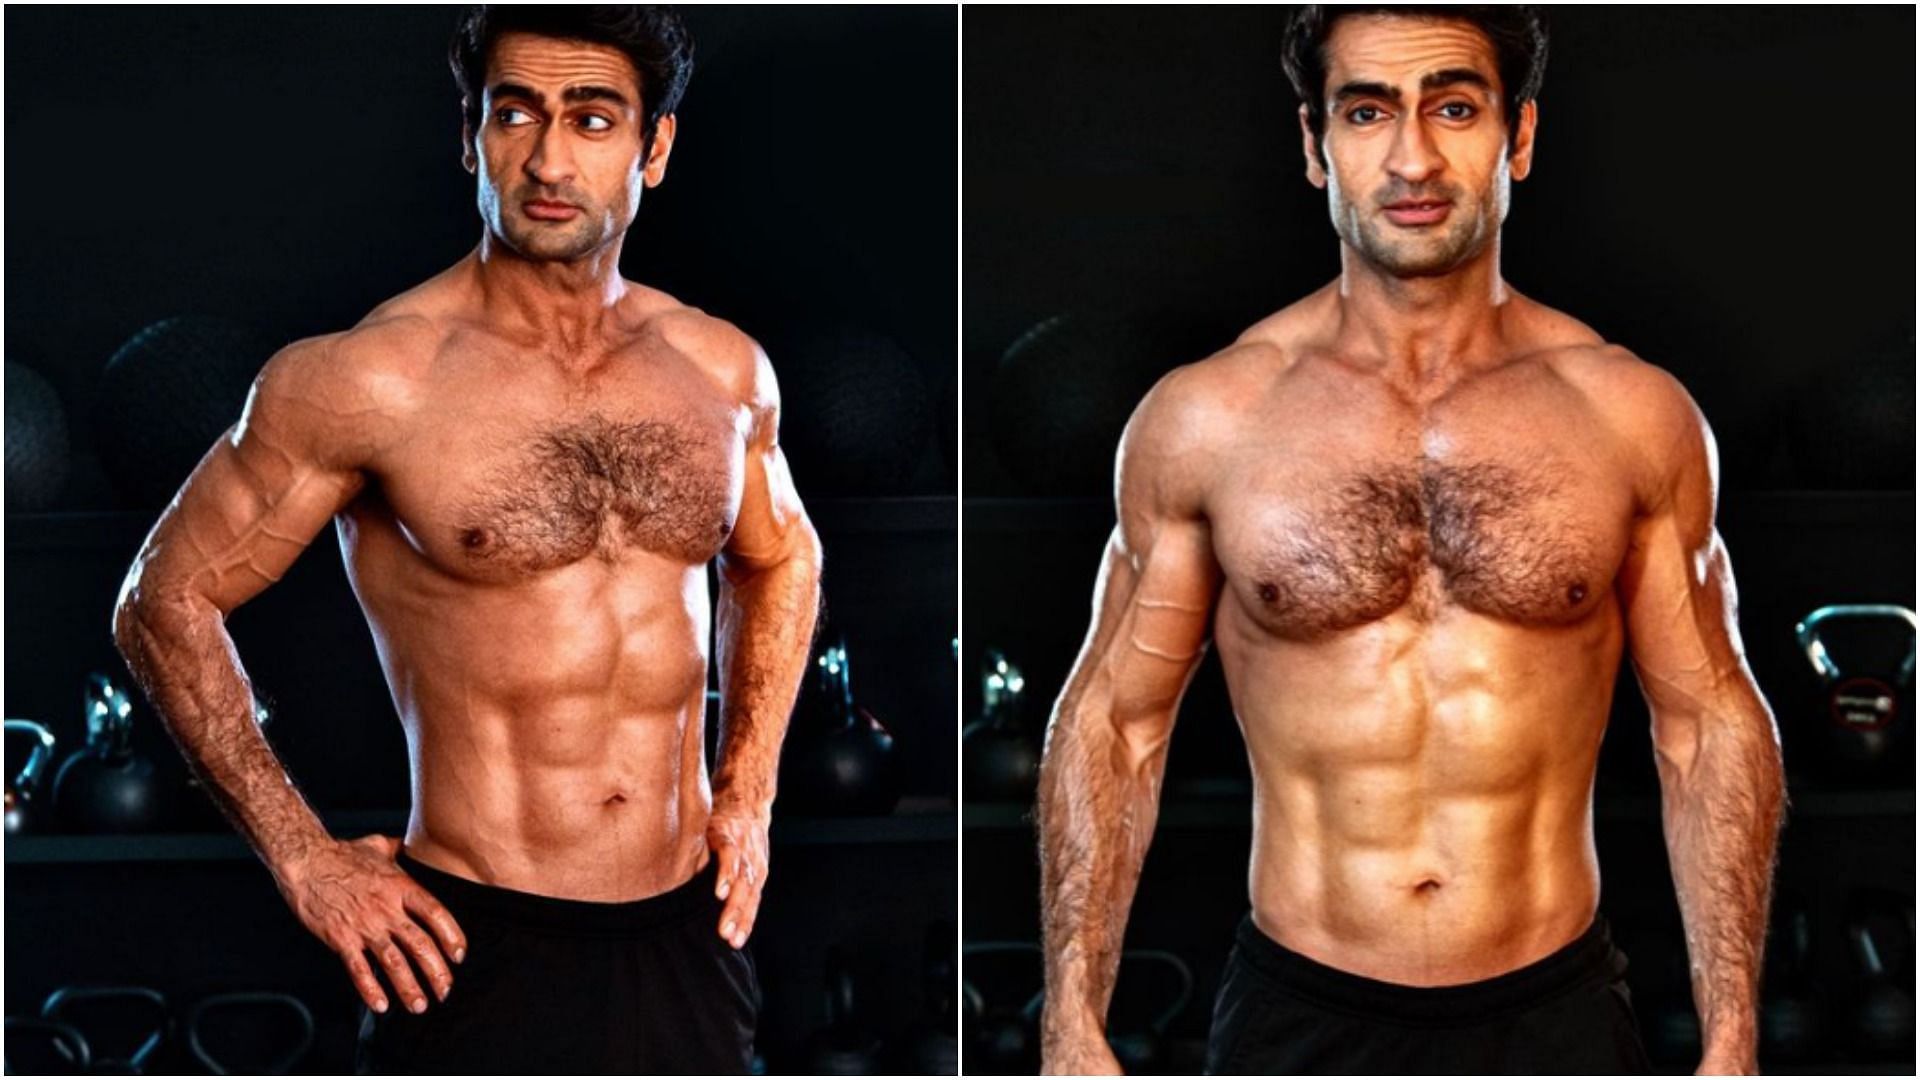 A strict workout &amp; diet schedule helped Nanjiani gain the desired body transformation. (Image via IG @kumailn)